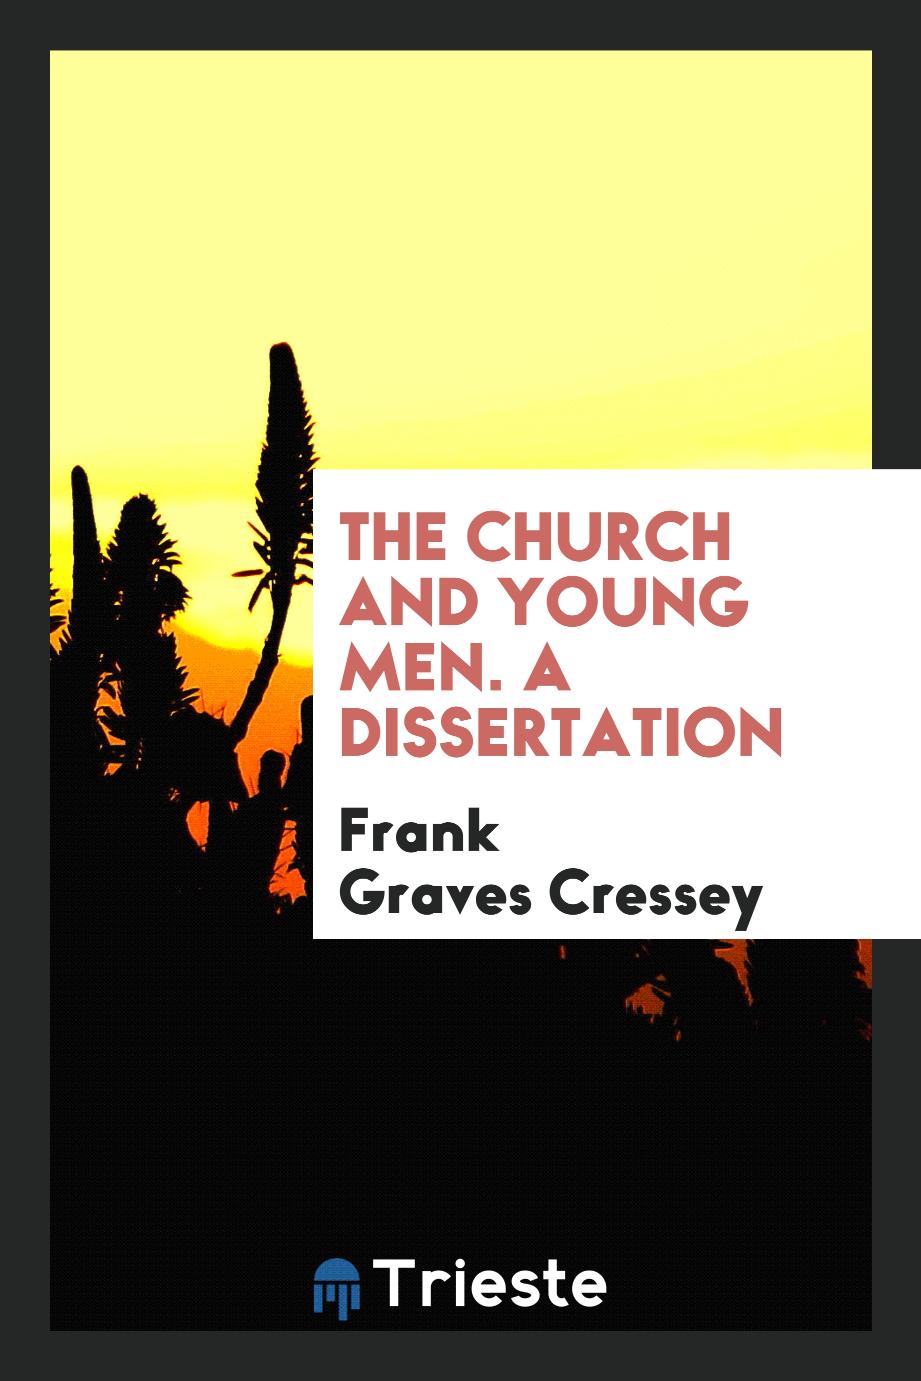 The church and young men. A dissertation